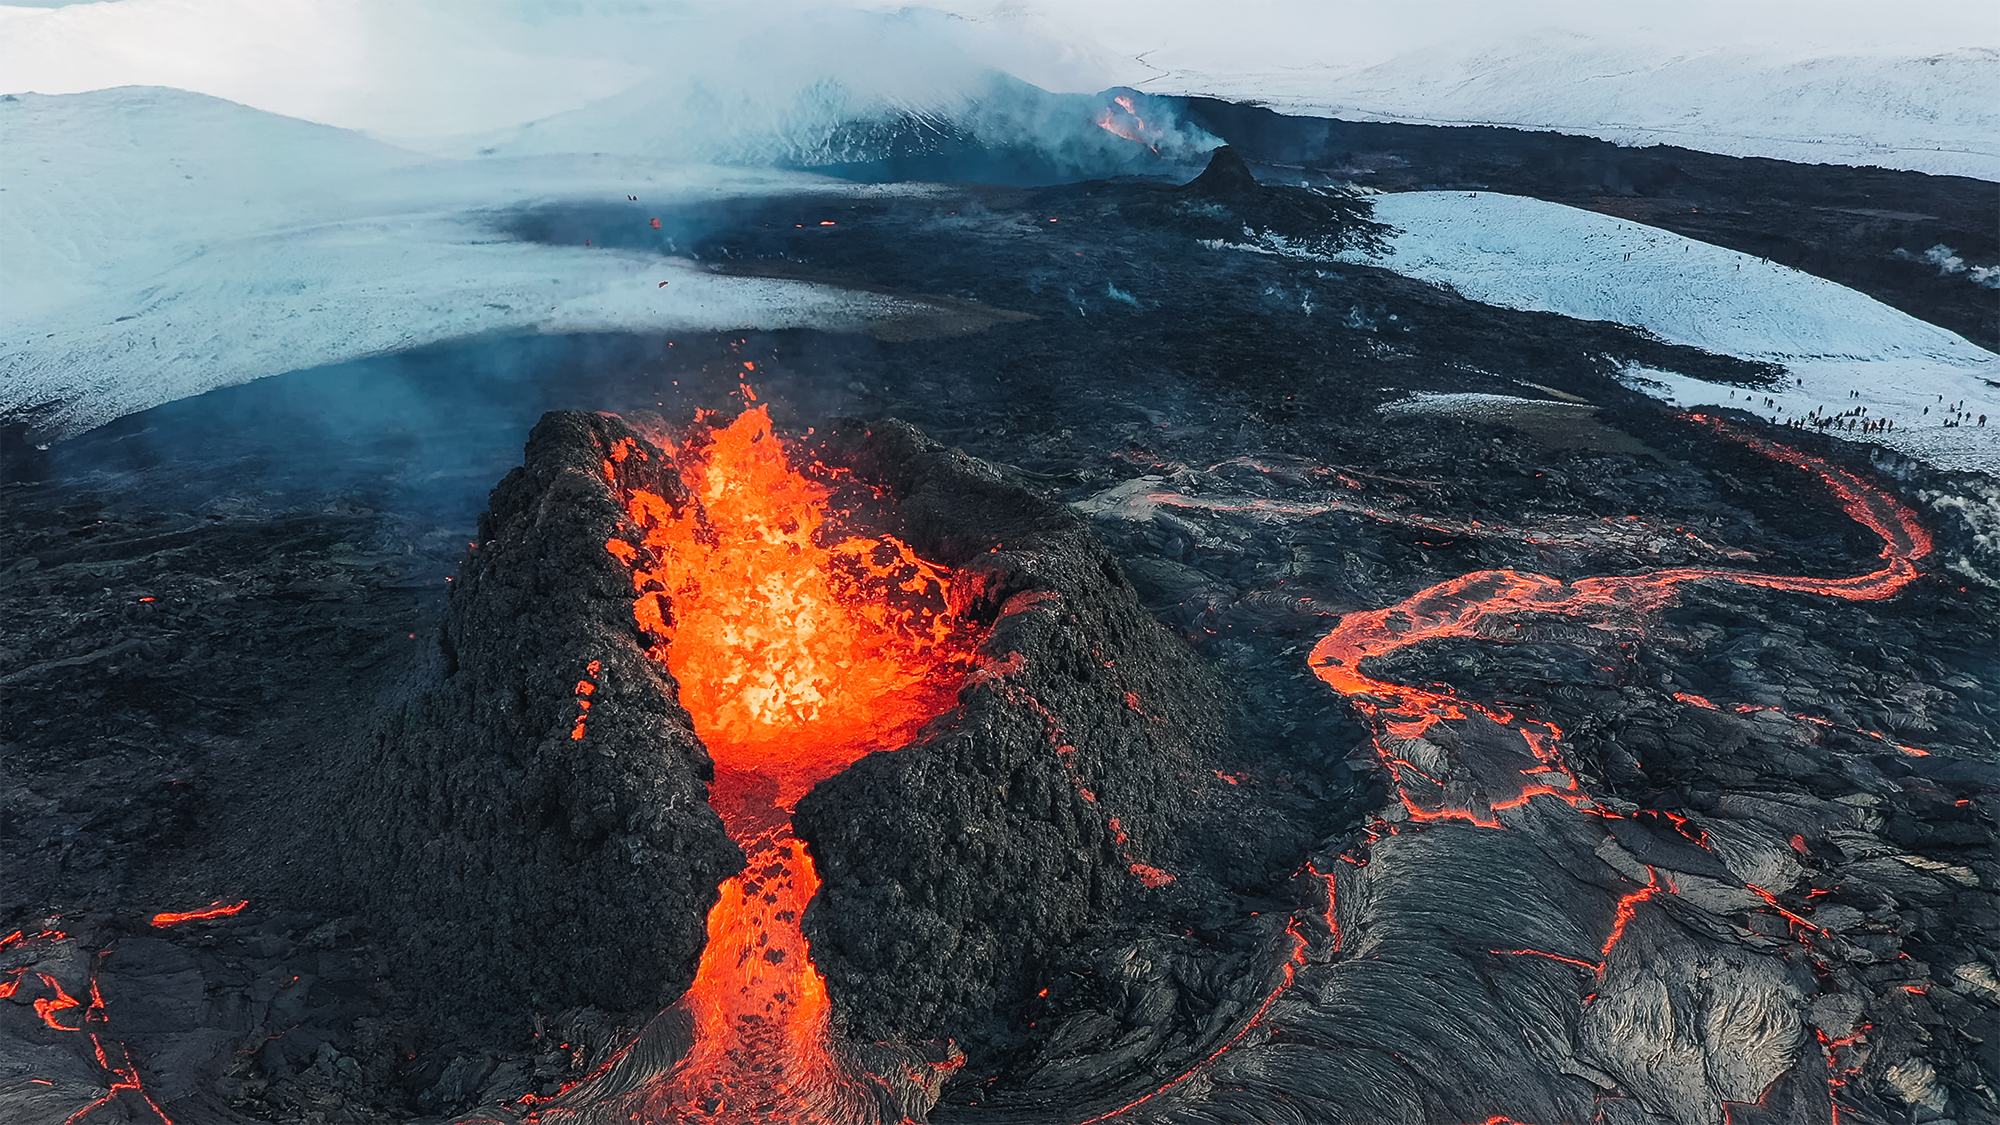 ‘Buoyant’ magma offers clues about the power of volcanoes